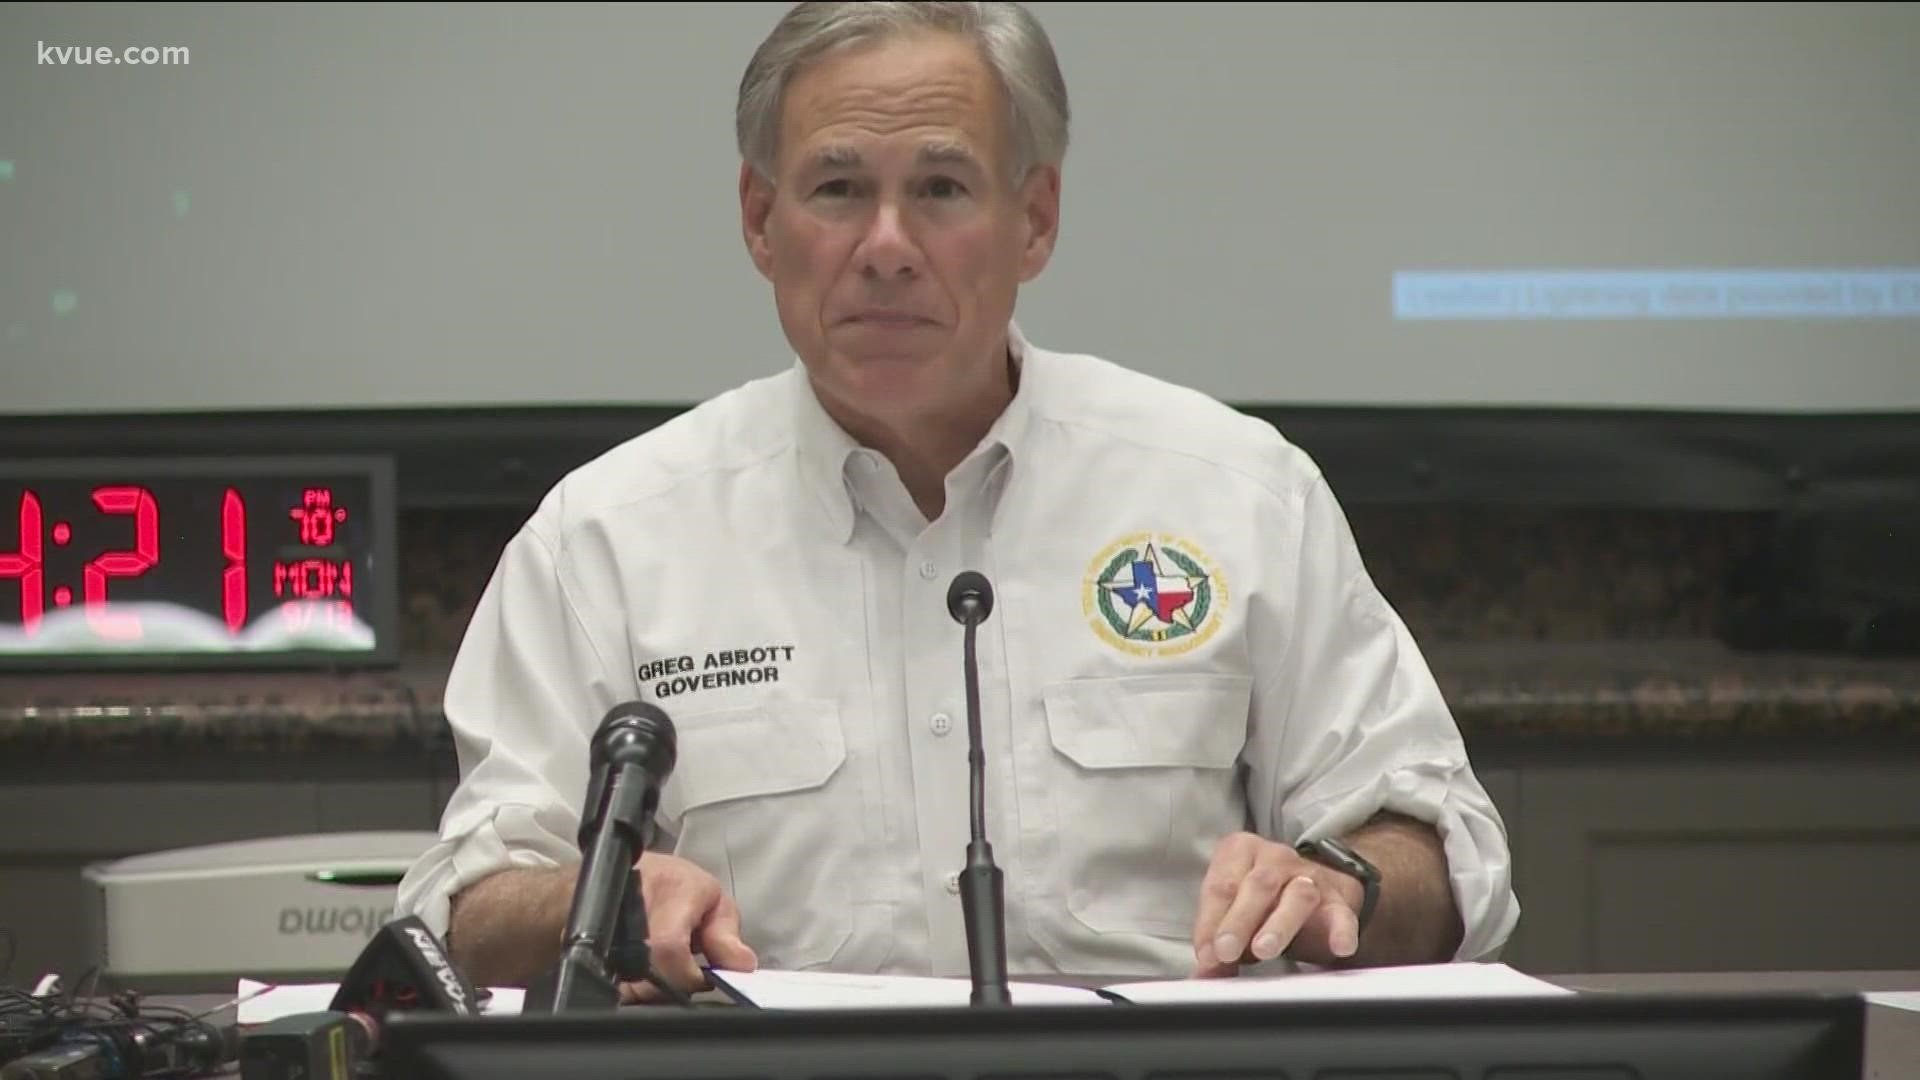 Gov. Greg Abbott hosted a press conference on Monday, Sept. 13, to provide an update on storm response.